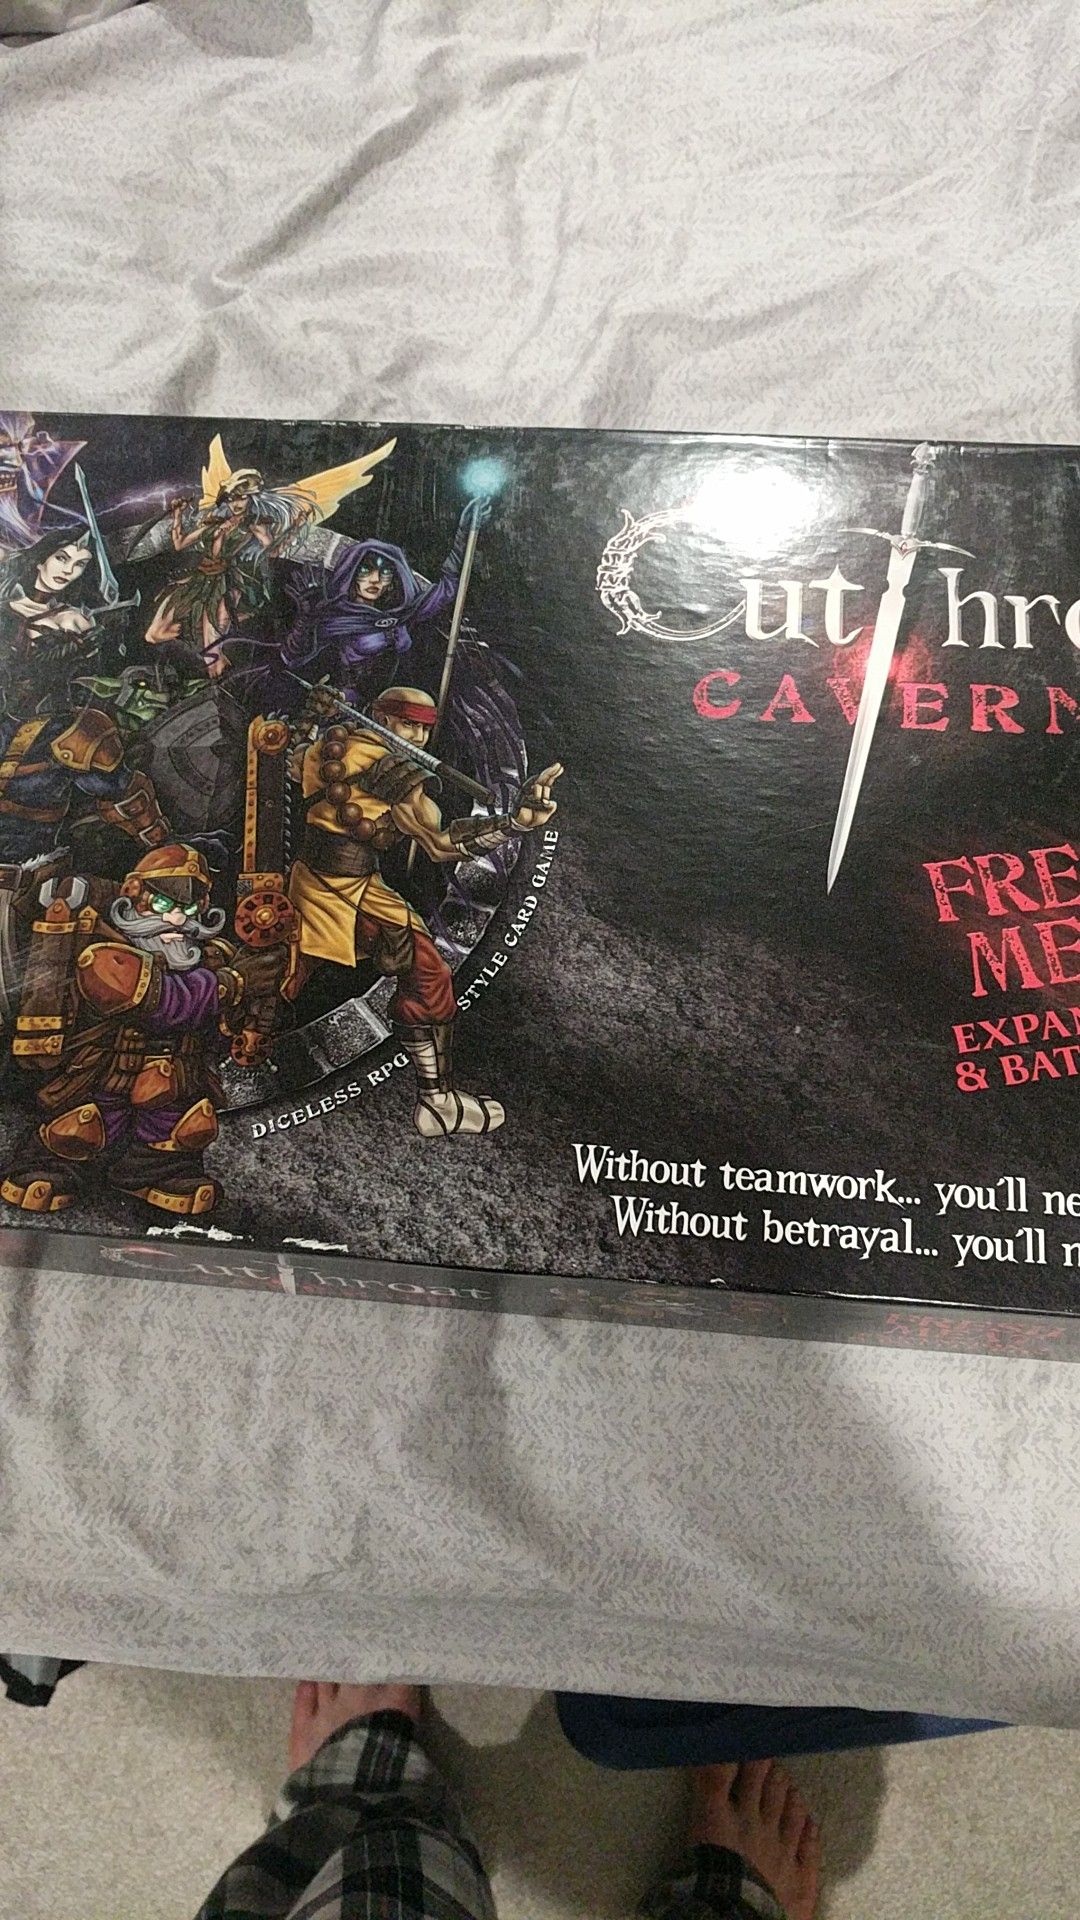 Cutthroat caverns board game and expansion